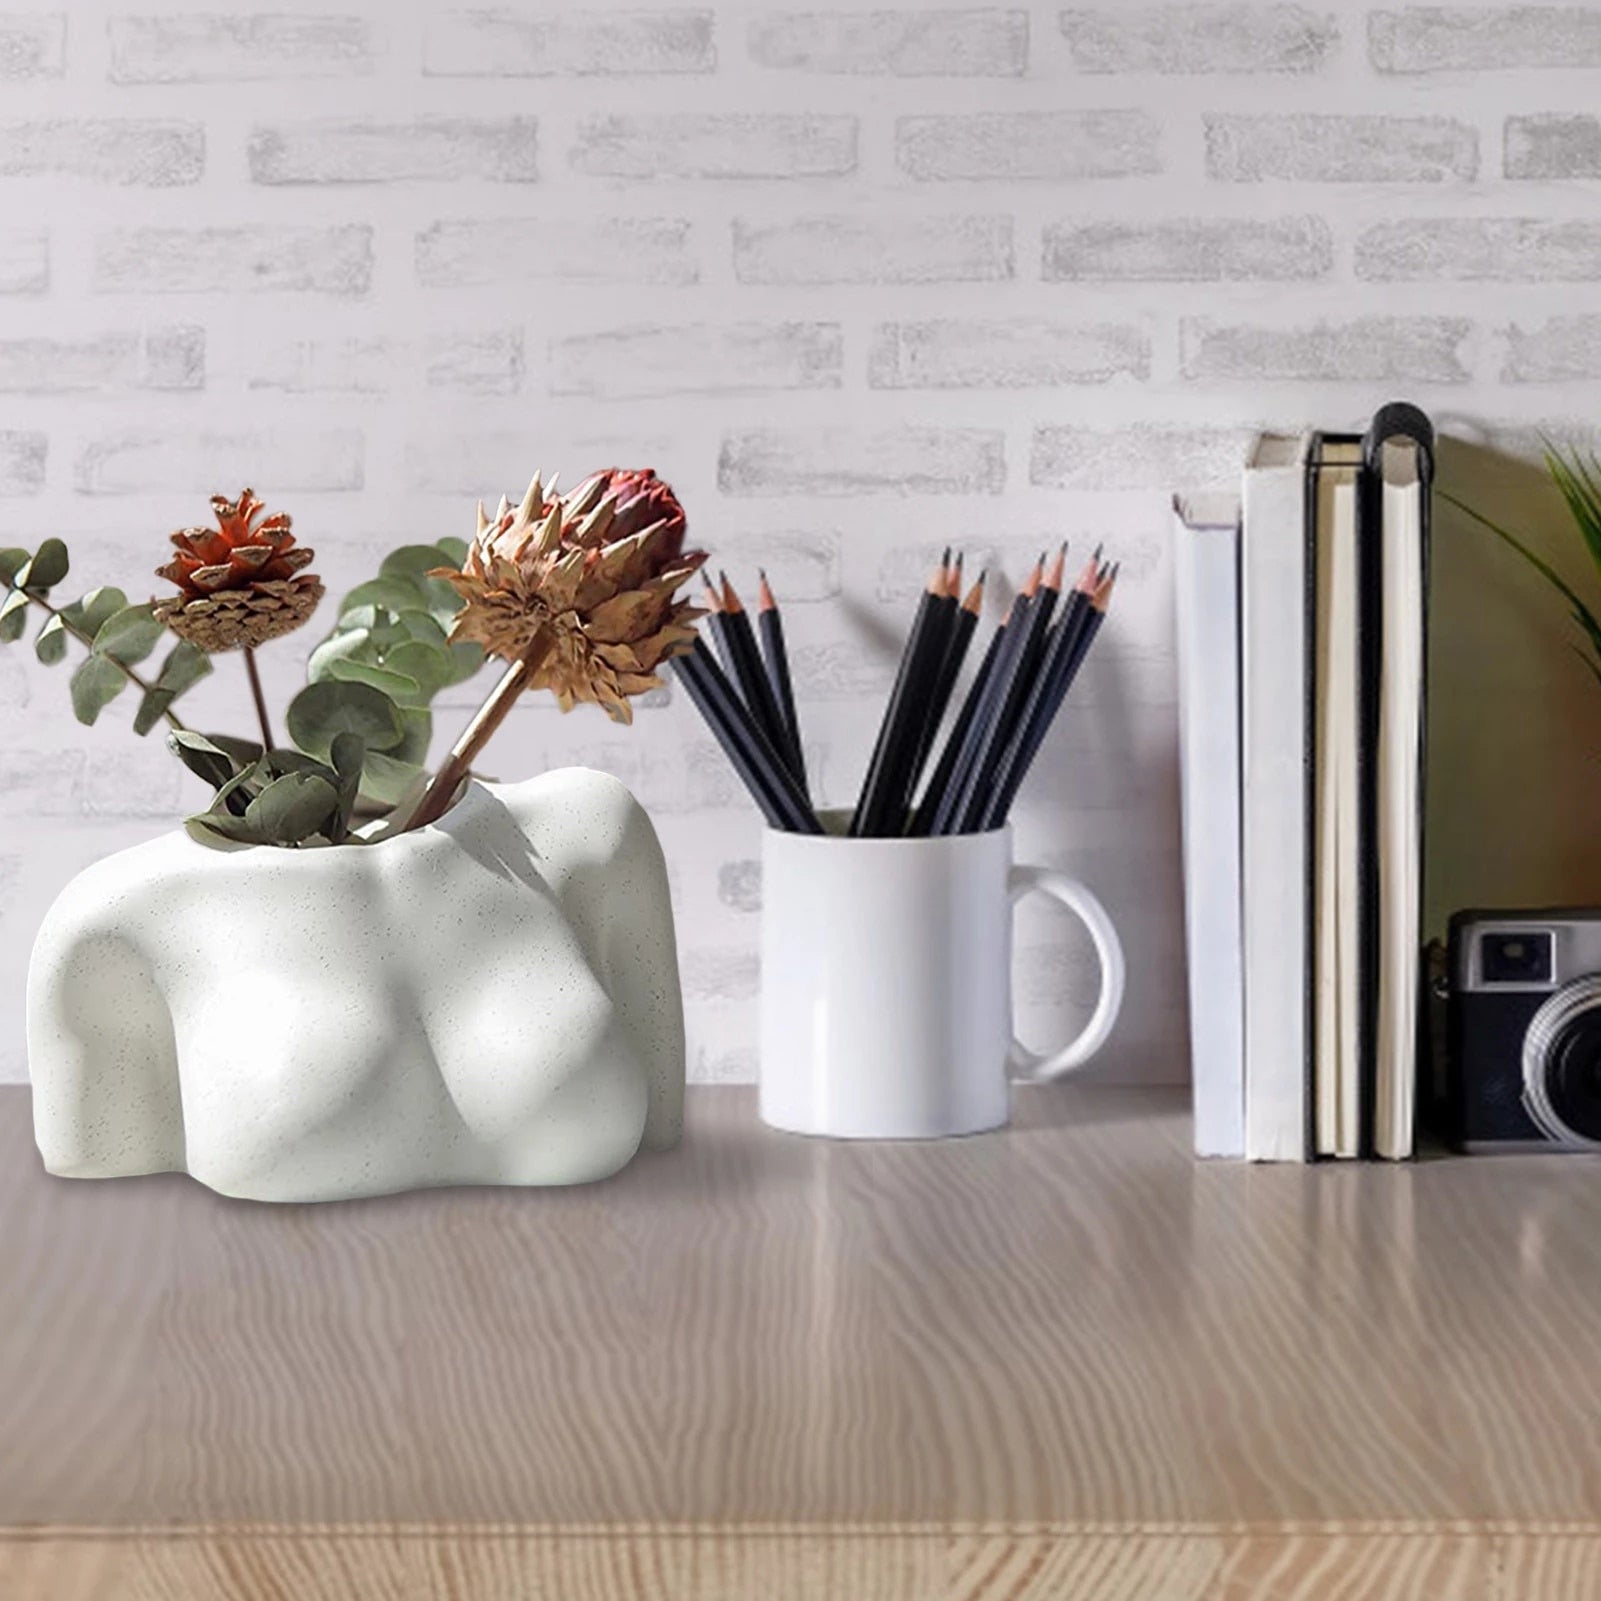 The speckled white vase placed on a desk next to a cup holding pencils, books, and a camera, blending the vase into everyday life as a functional decor item.